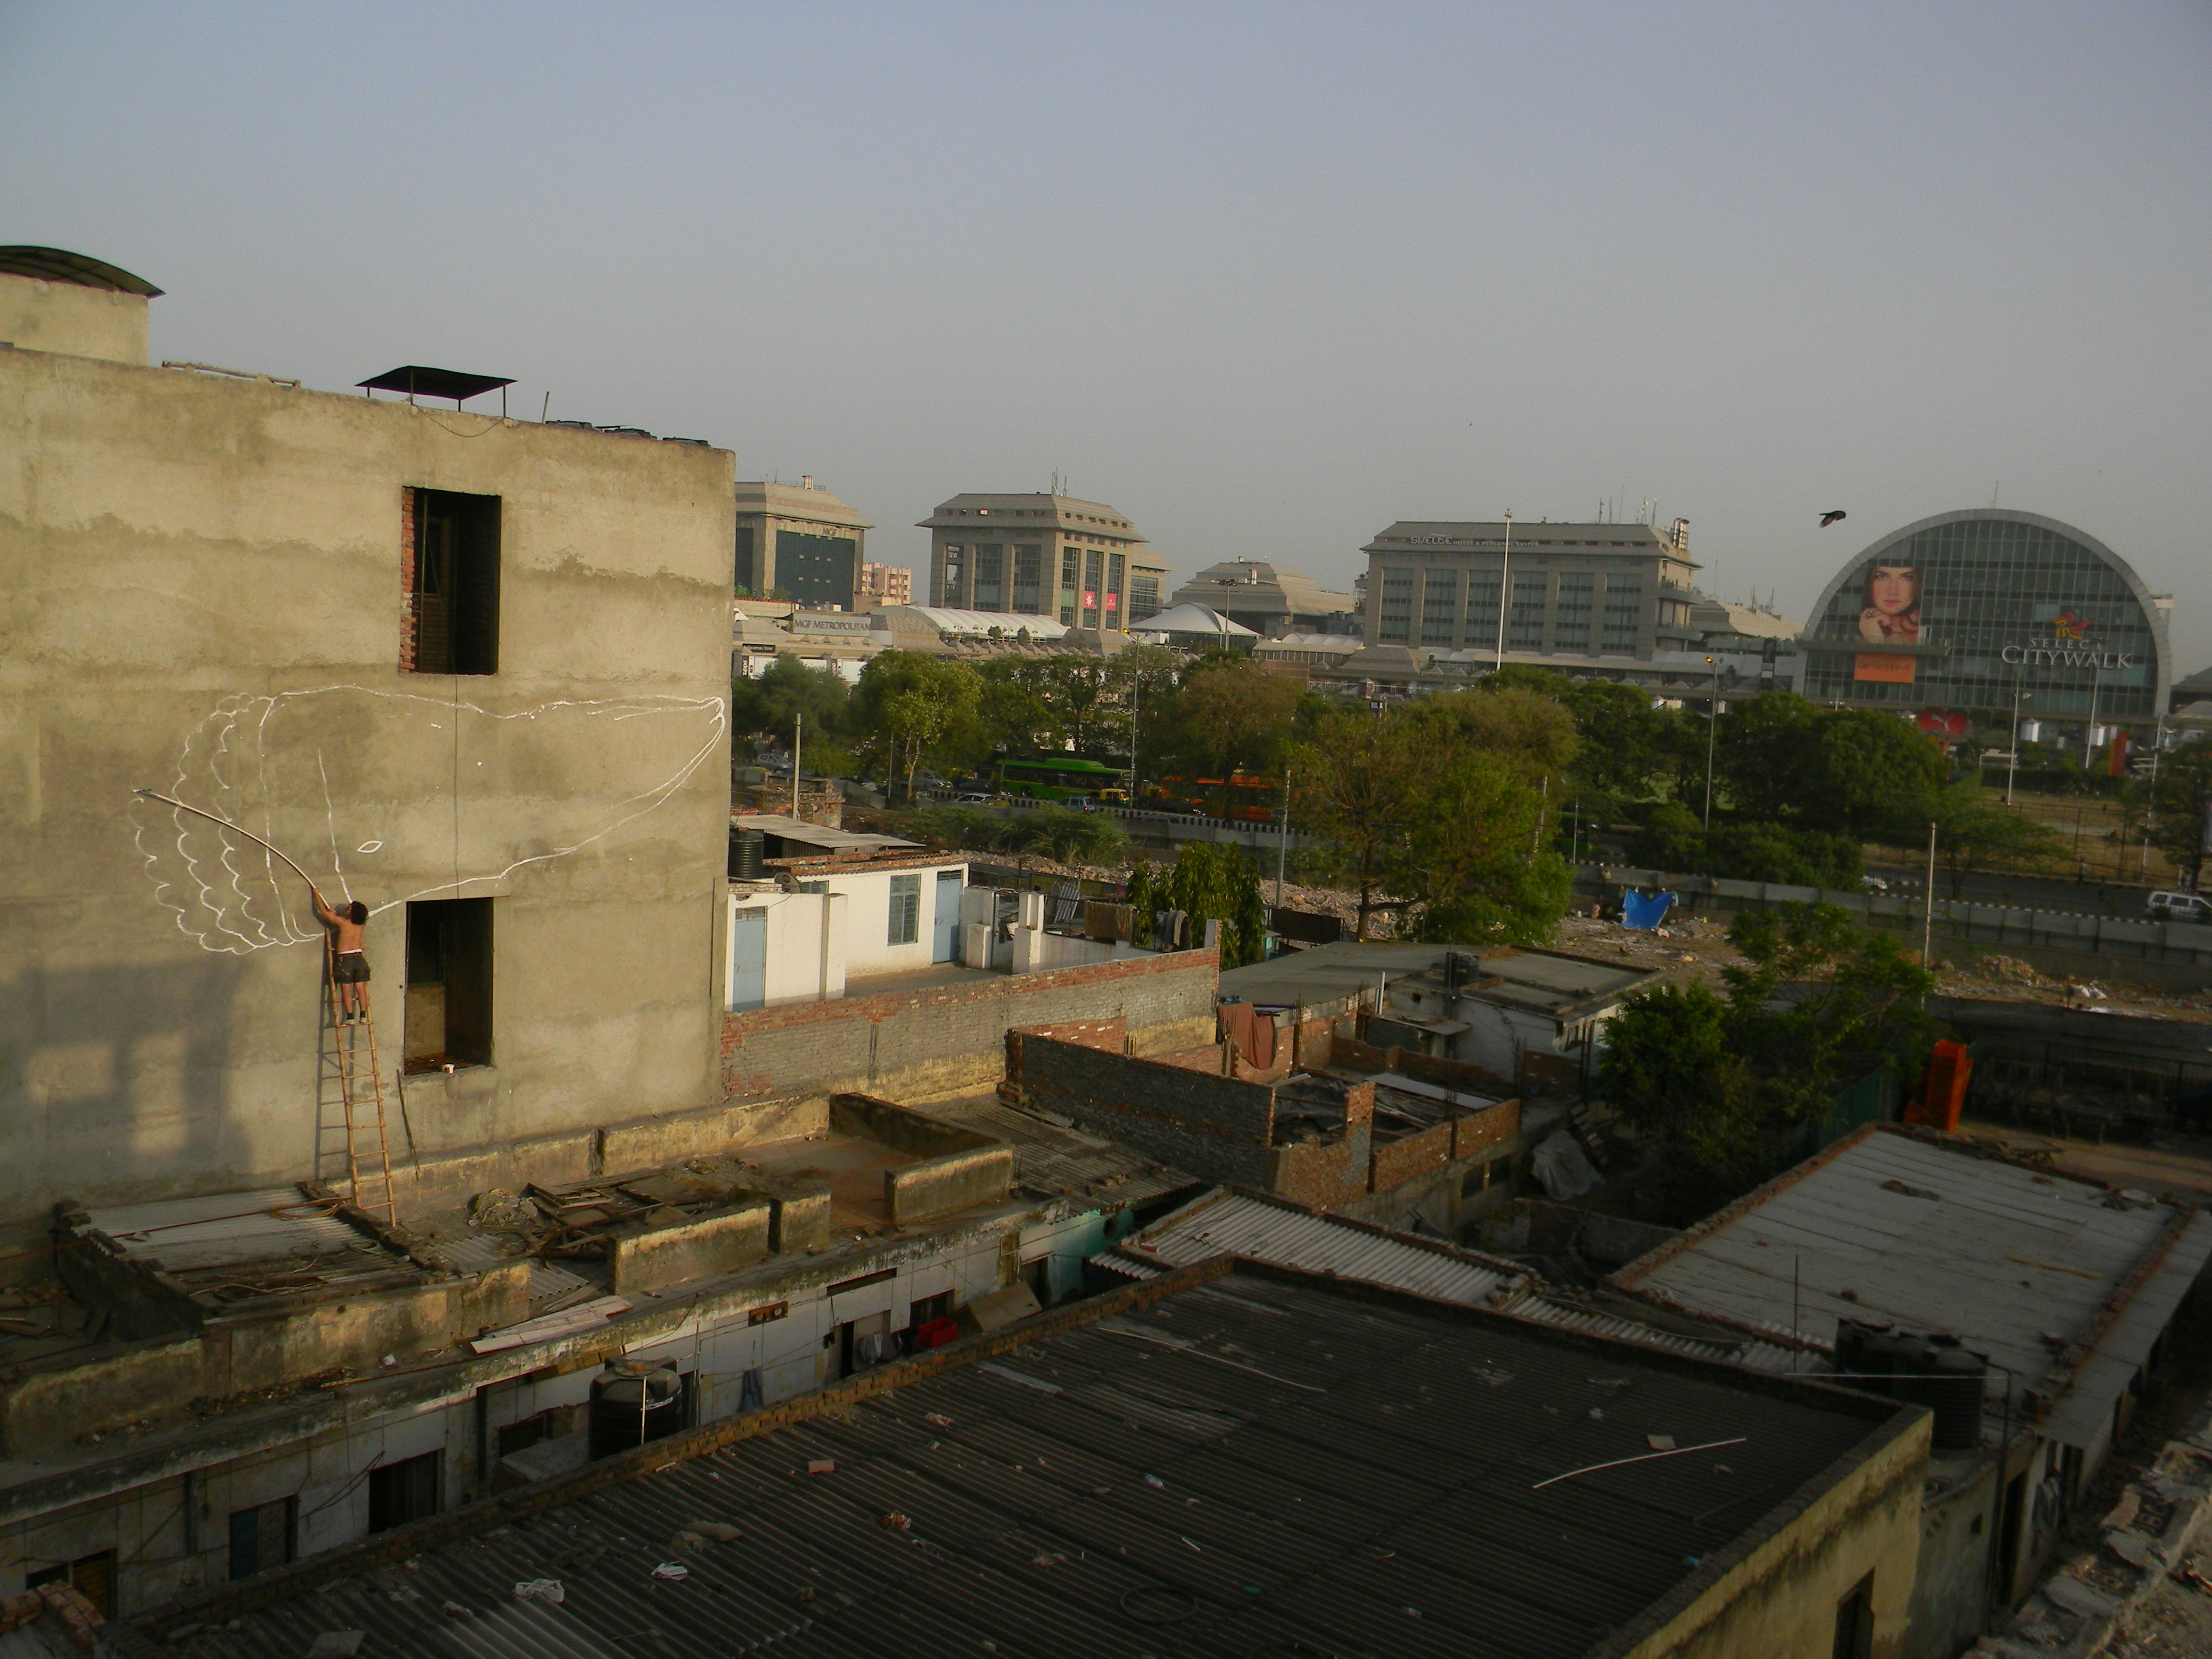 A view of some flat rooftops in Delhi. On the left is a figure standing on a stepladder, painting a large shape on a building facade.